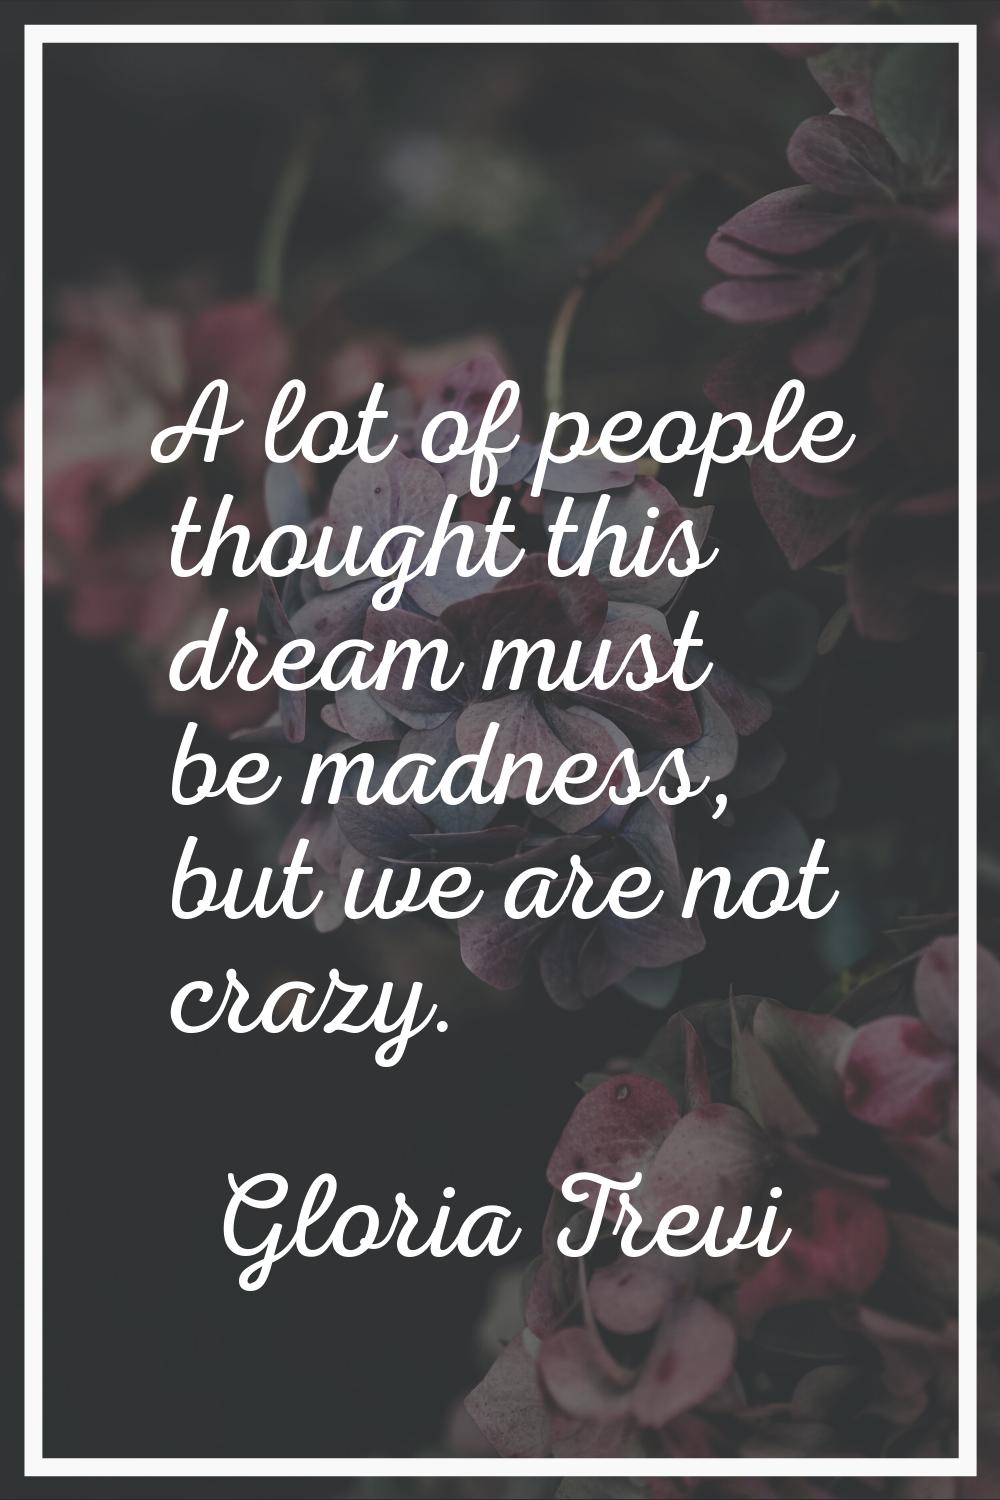 A lot of people thought this dream must be madness, but we are not crazy.